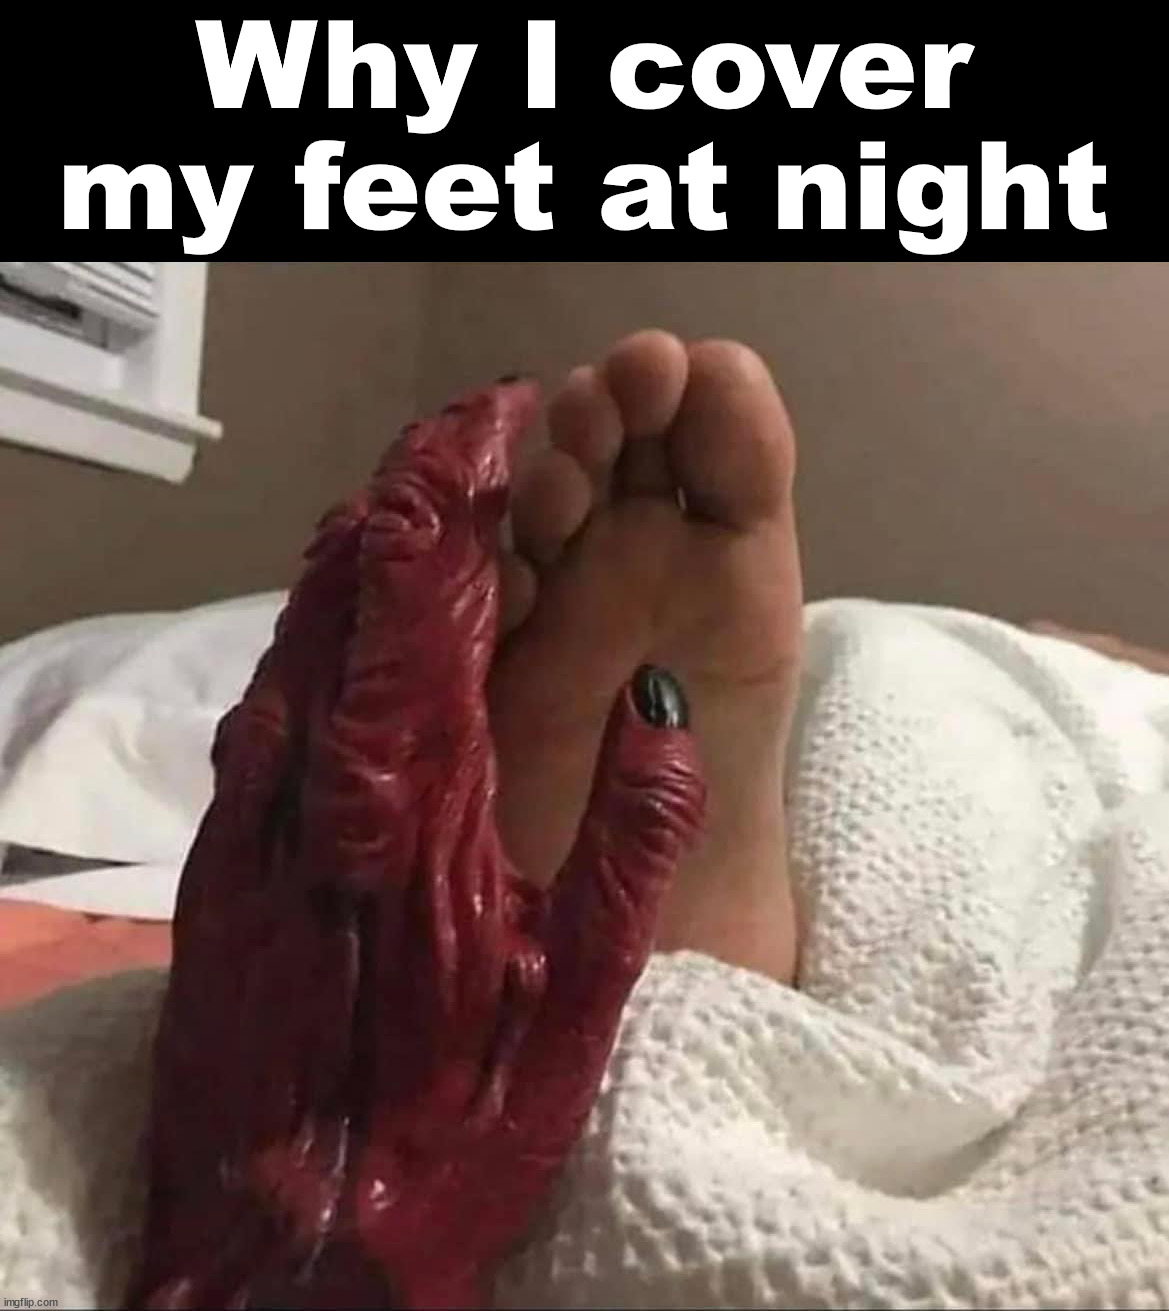 At least I have some contact with something | Why I cover my feet at night | image tagged in demon,feet,sleeping | made w/ Imgflip meme maker